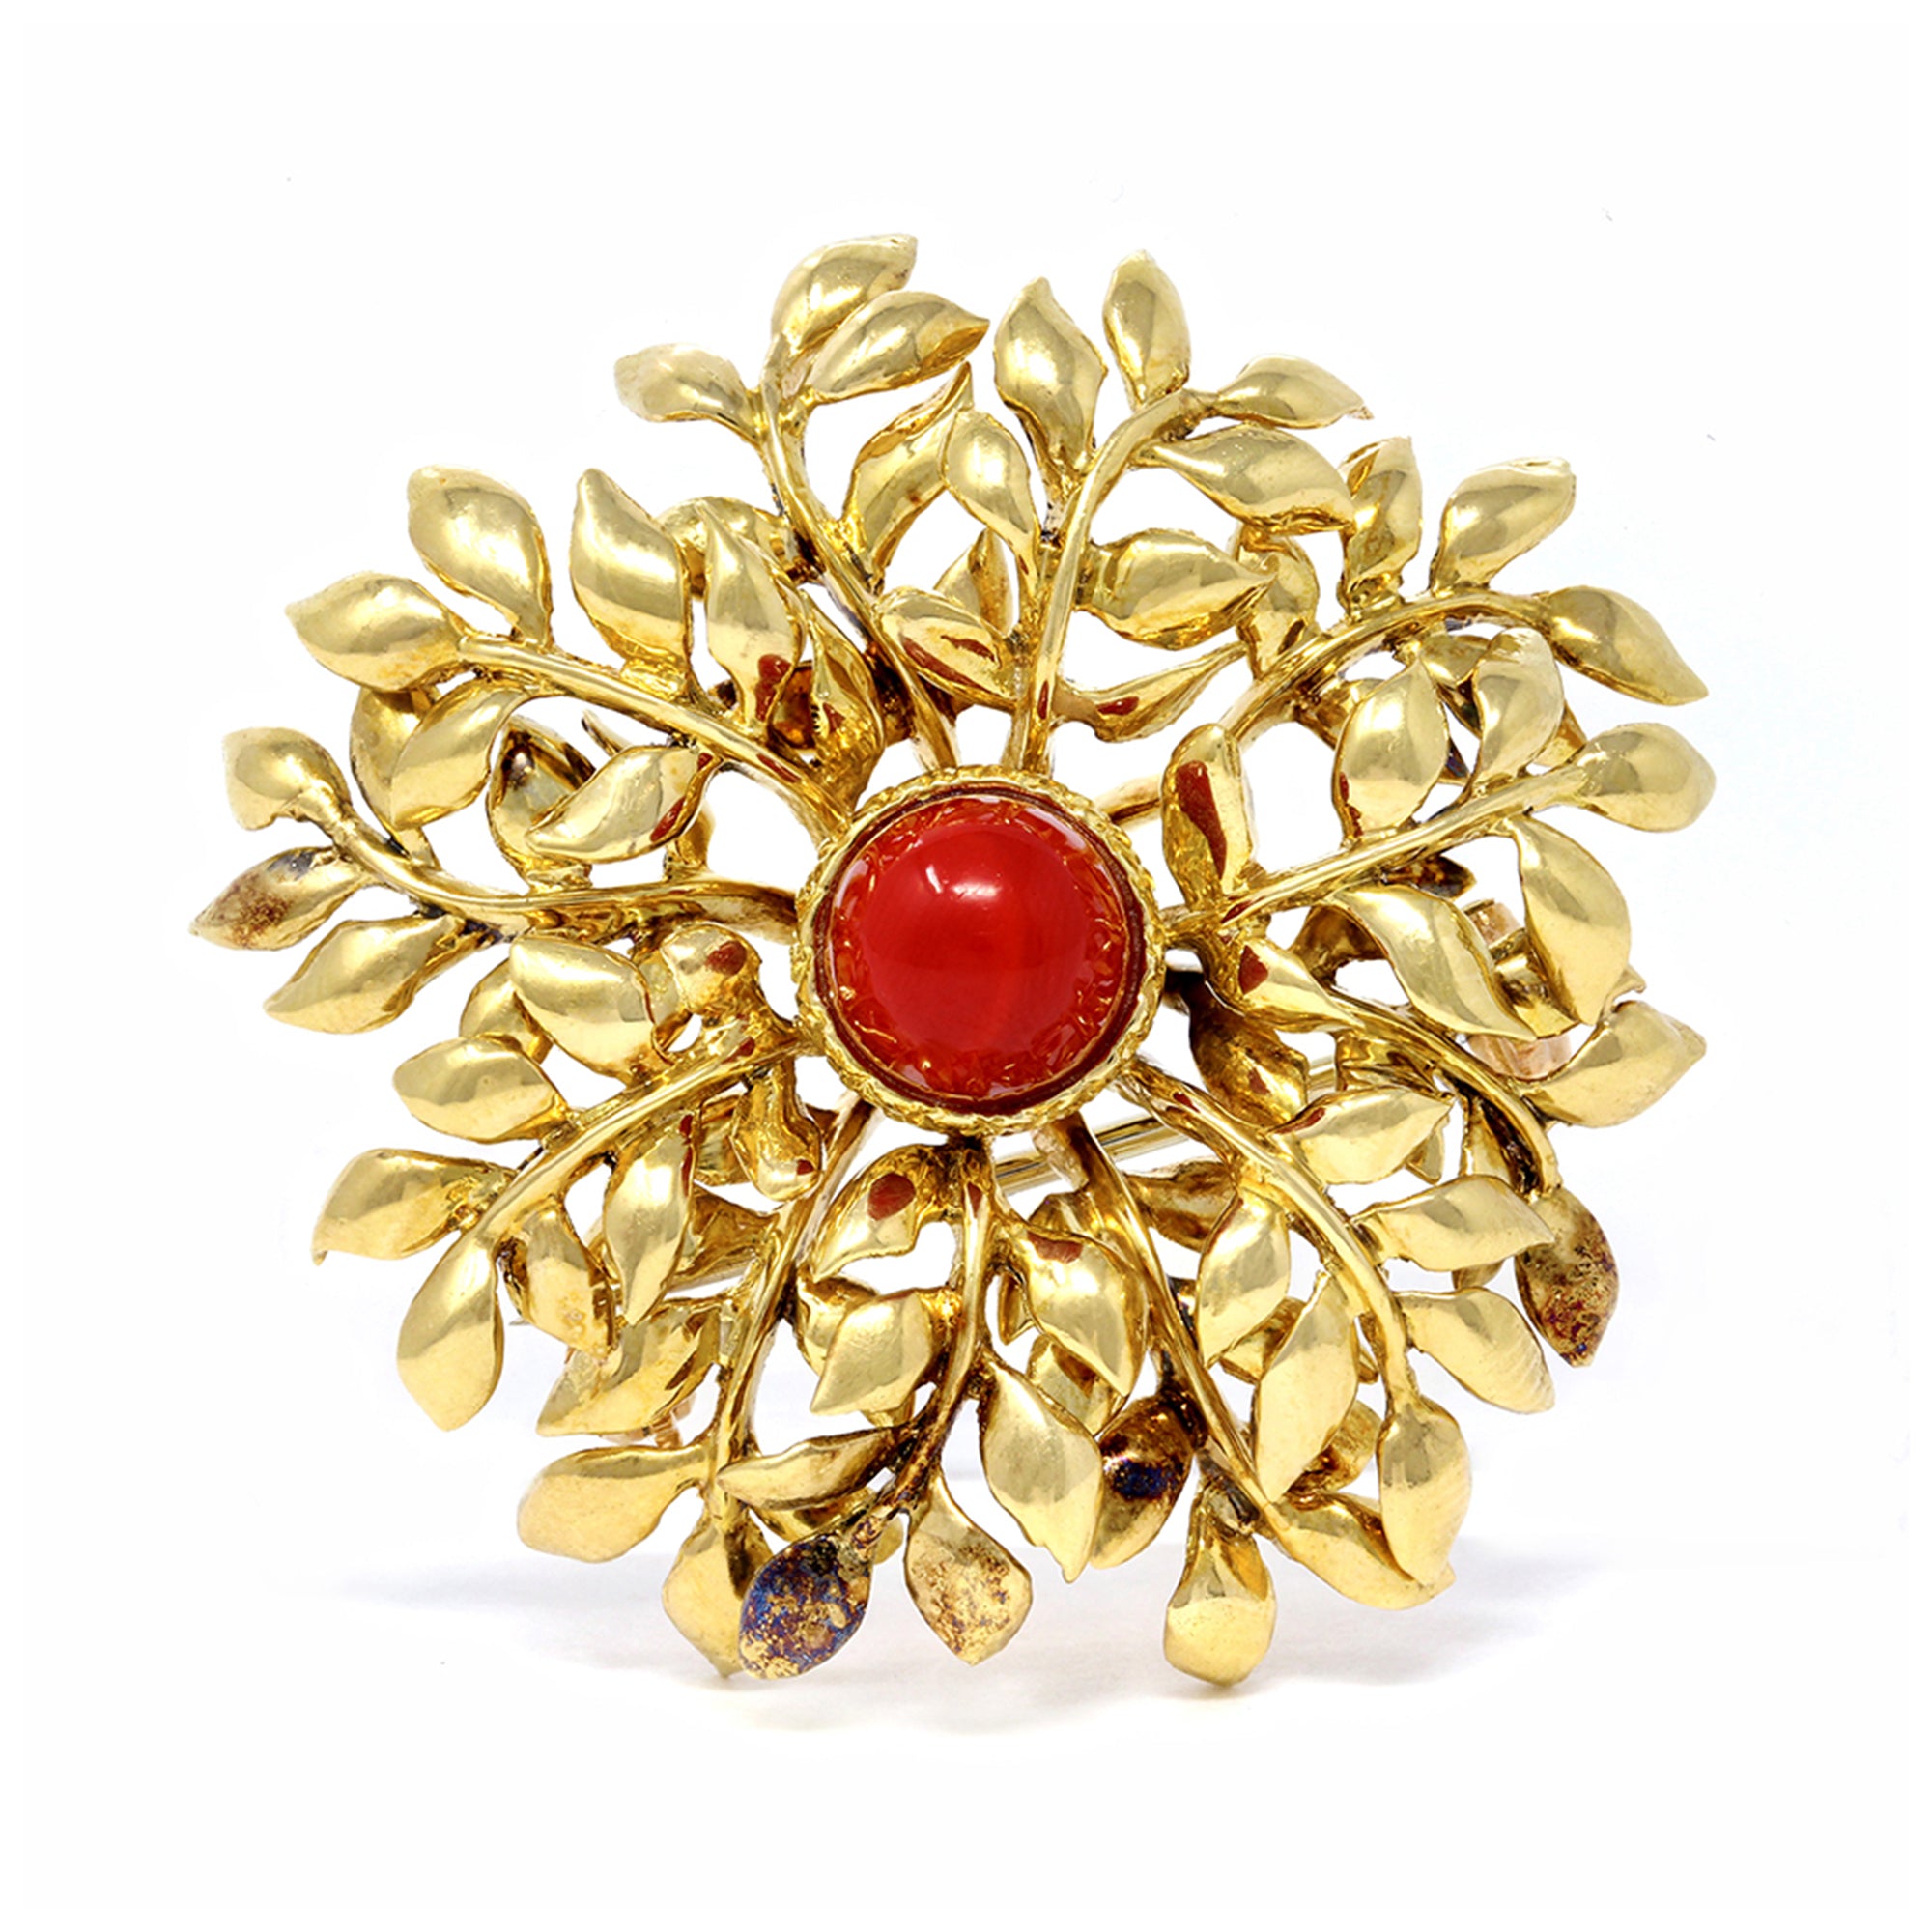 Tiffany & Co. 18 Karat Red Coral and Yellow Gold Brooch front view